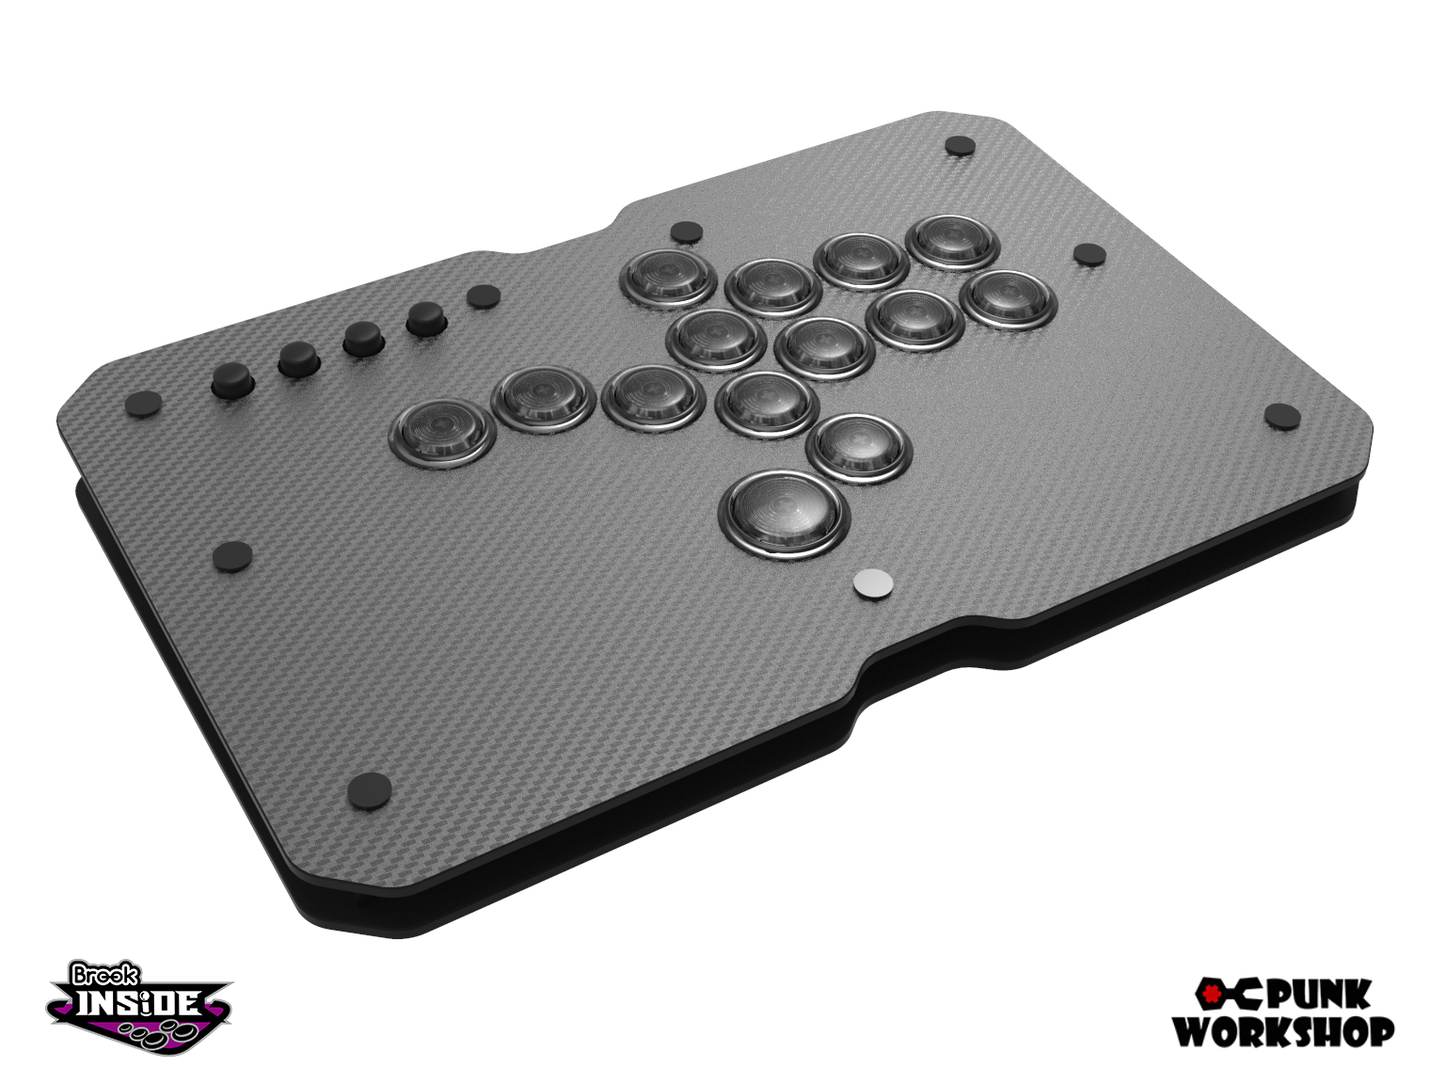 MINI BOX CARBON レバーレスコントローラー 2023 (Brook PS5 PS4 PS3/Switch/PC)